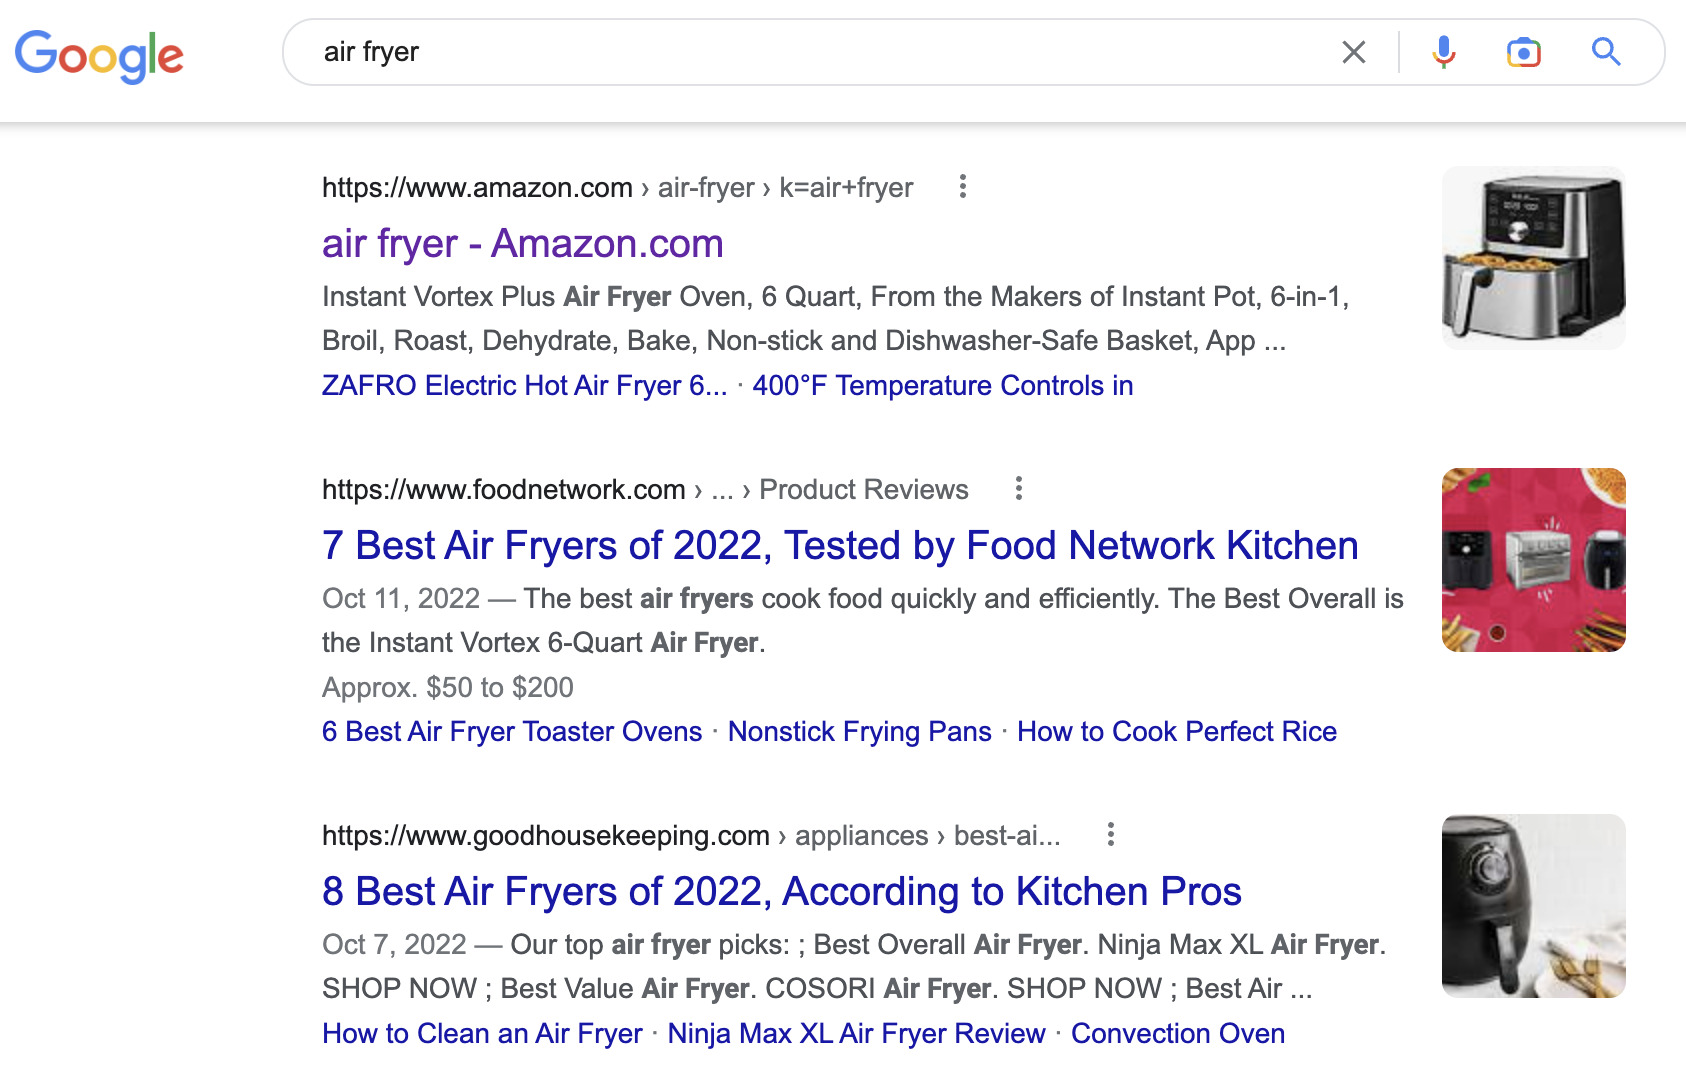 Top search results for "air fryer" in 2022